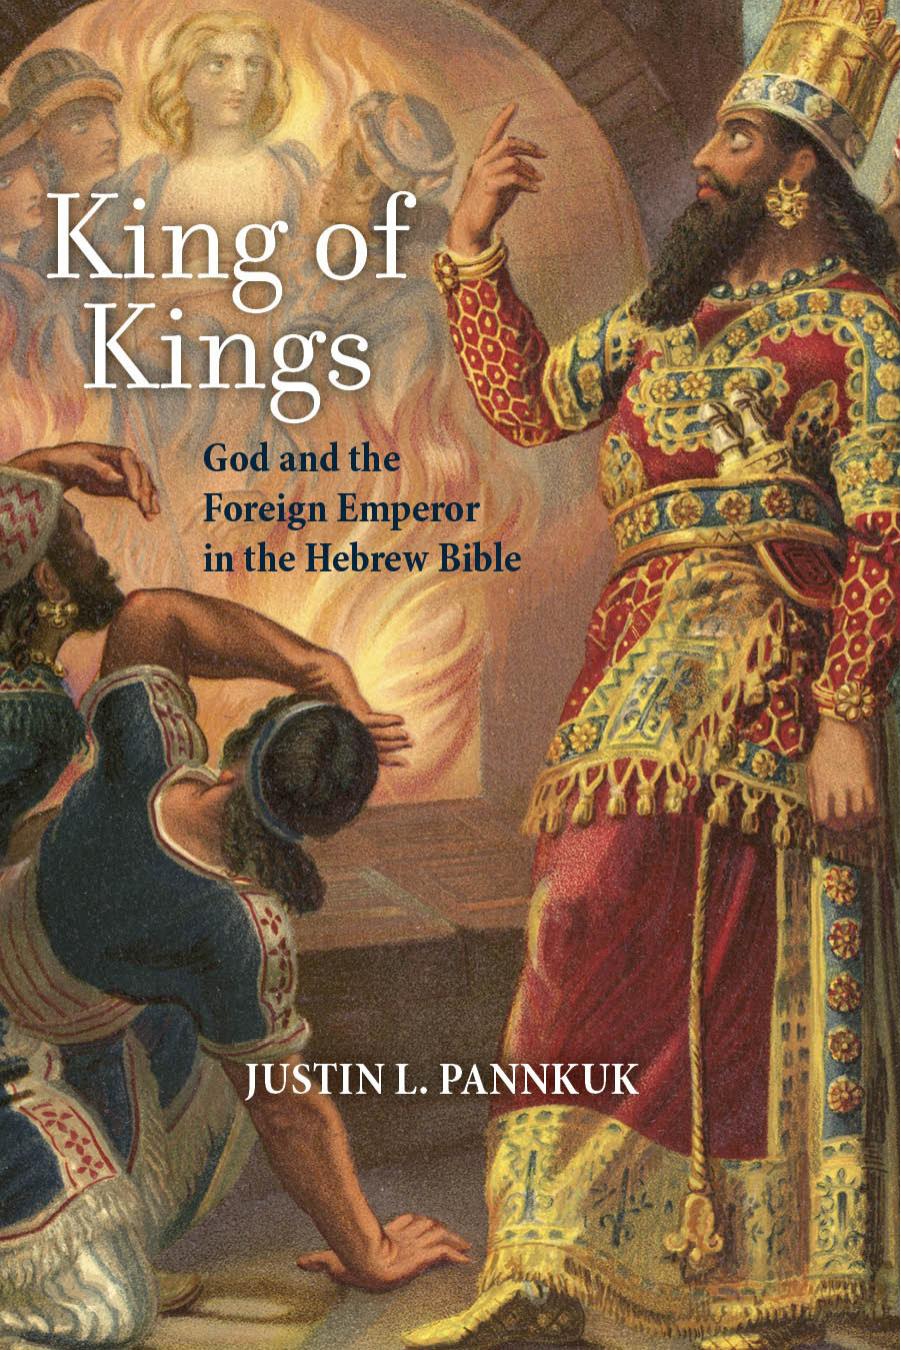 King of Kings: God and the Foreign Emperor in the Hebrew Bible by Justin L. Pannkuk